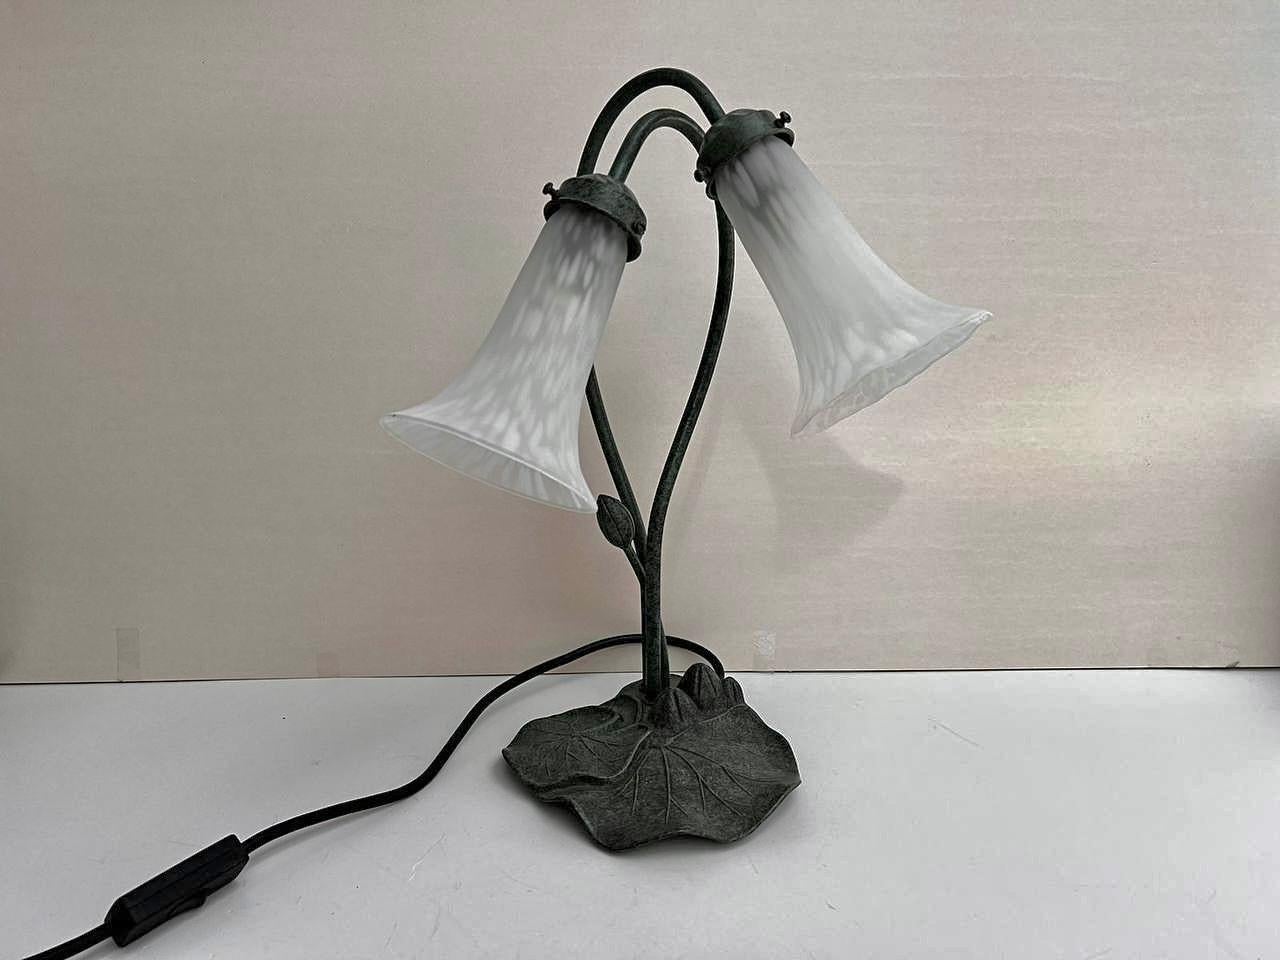 Charming water lily lamp with a lily pad base and white fluted lily flower shades. Belgium, 1990s

A quality reproduction of an Art Nouveau style lamp.

Metal table lamp with reliefs in the form of water lily leaves, 2 plafonds in the form of